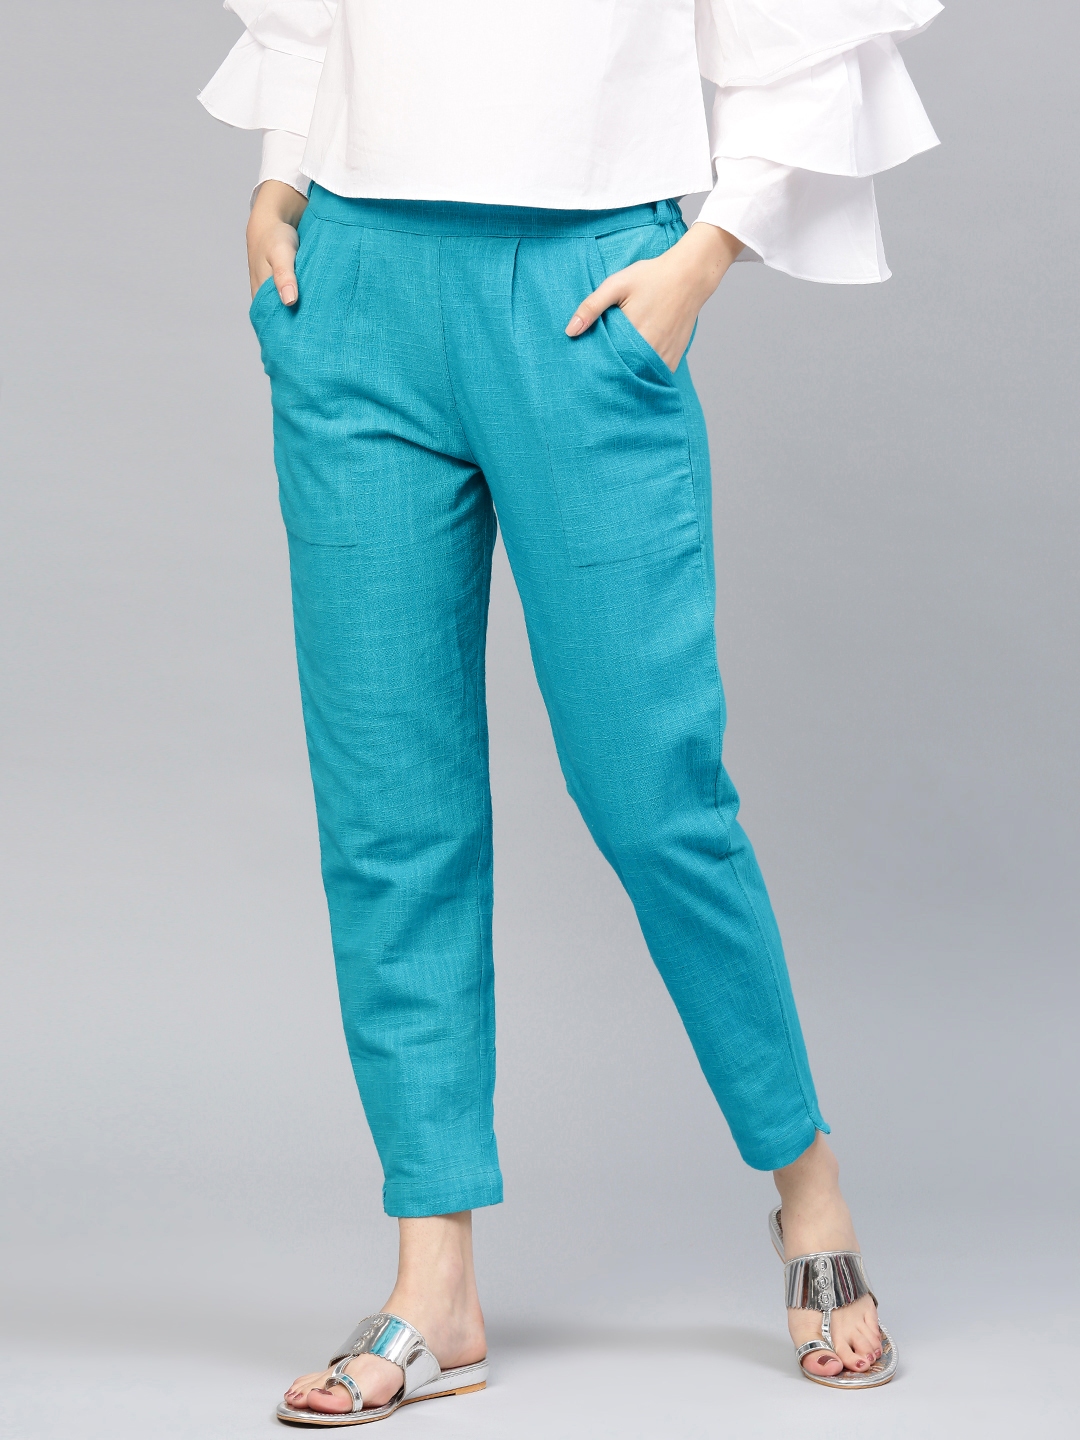 Turquoise Trousers  Buy Turquoise Trousers online in India